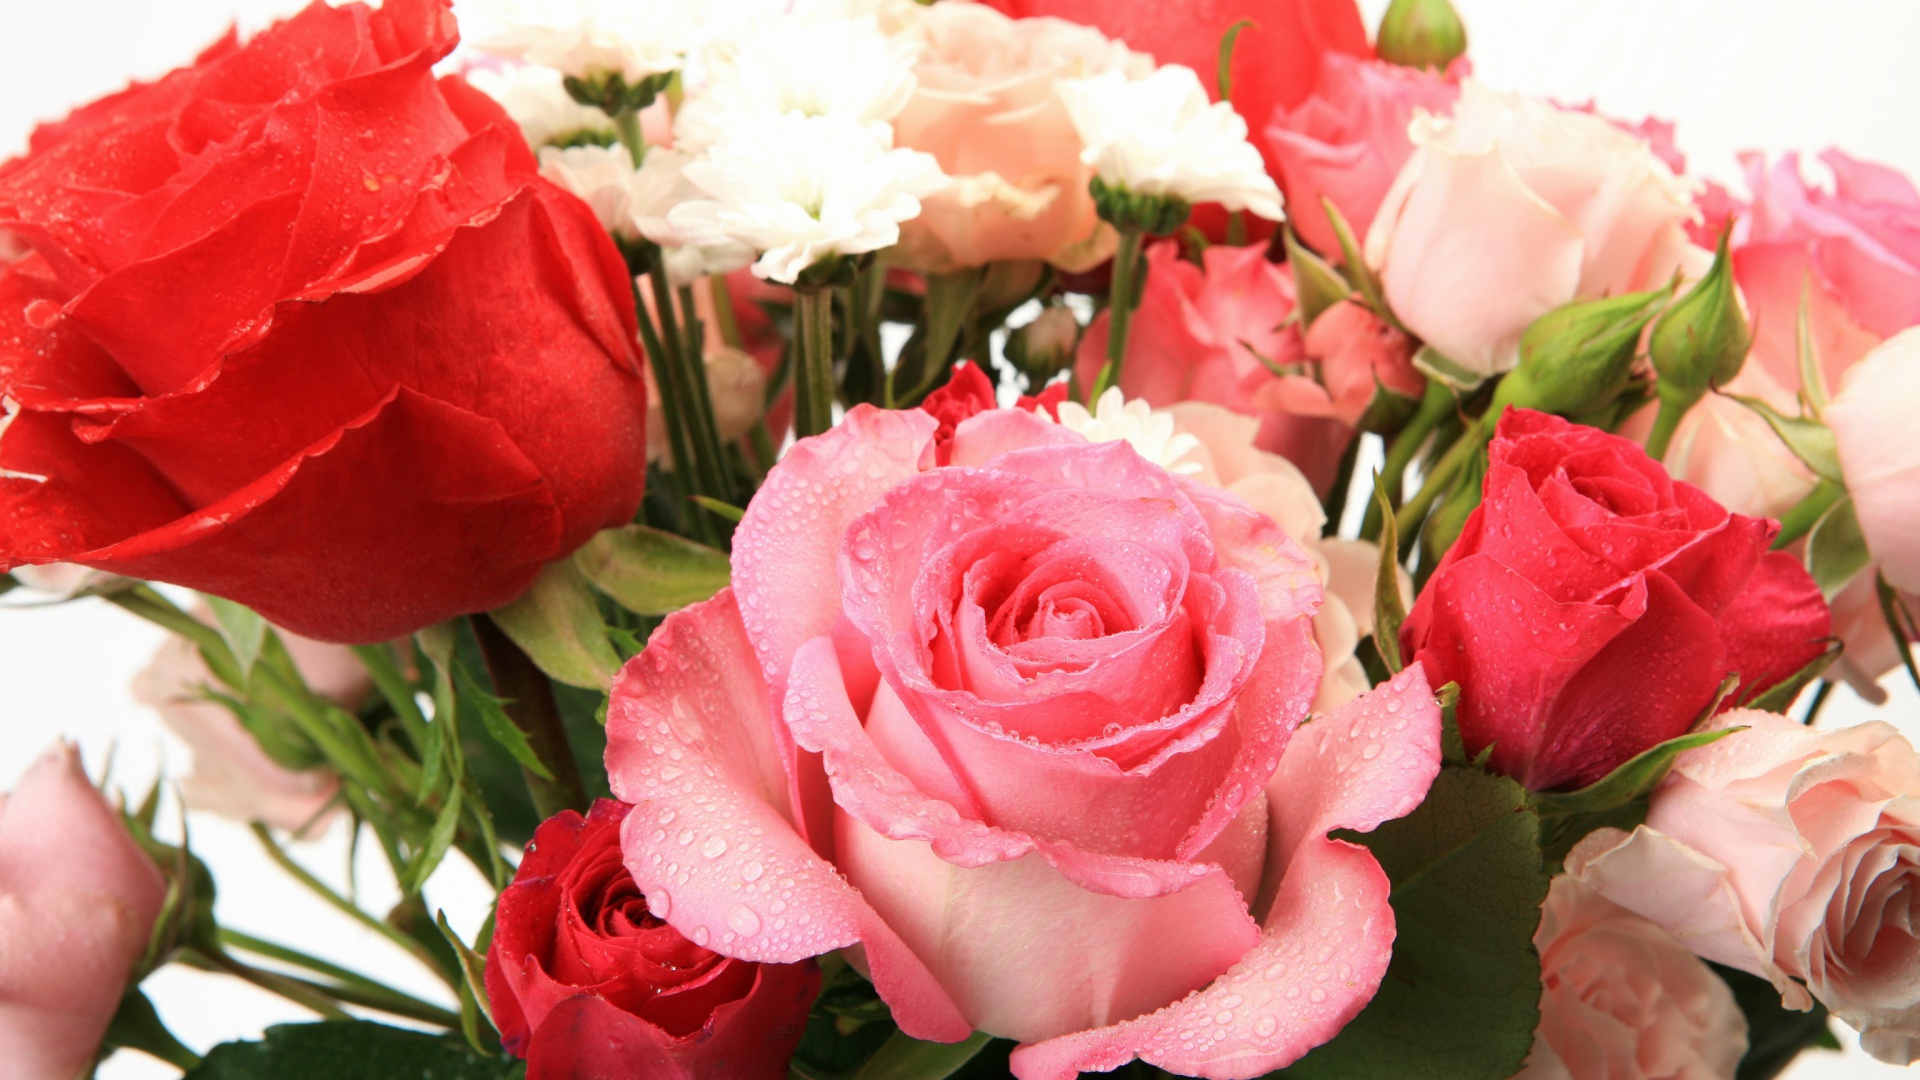 Bouquet of roses for Princess wallpaper 1920x1080